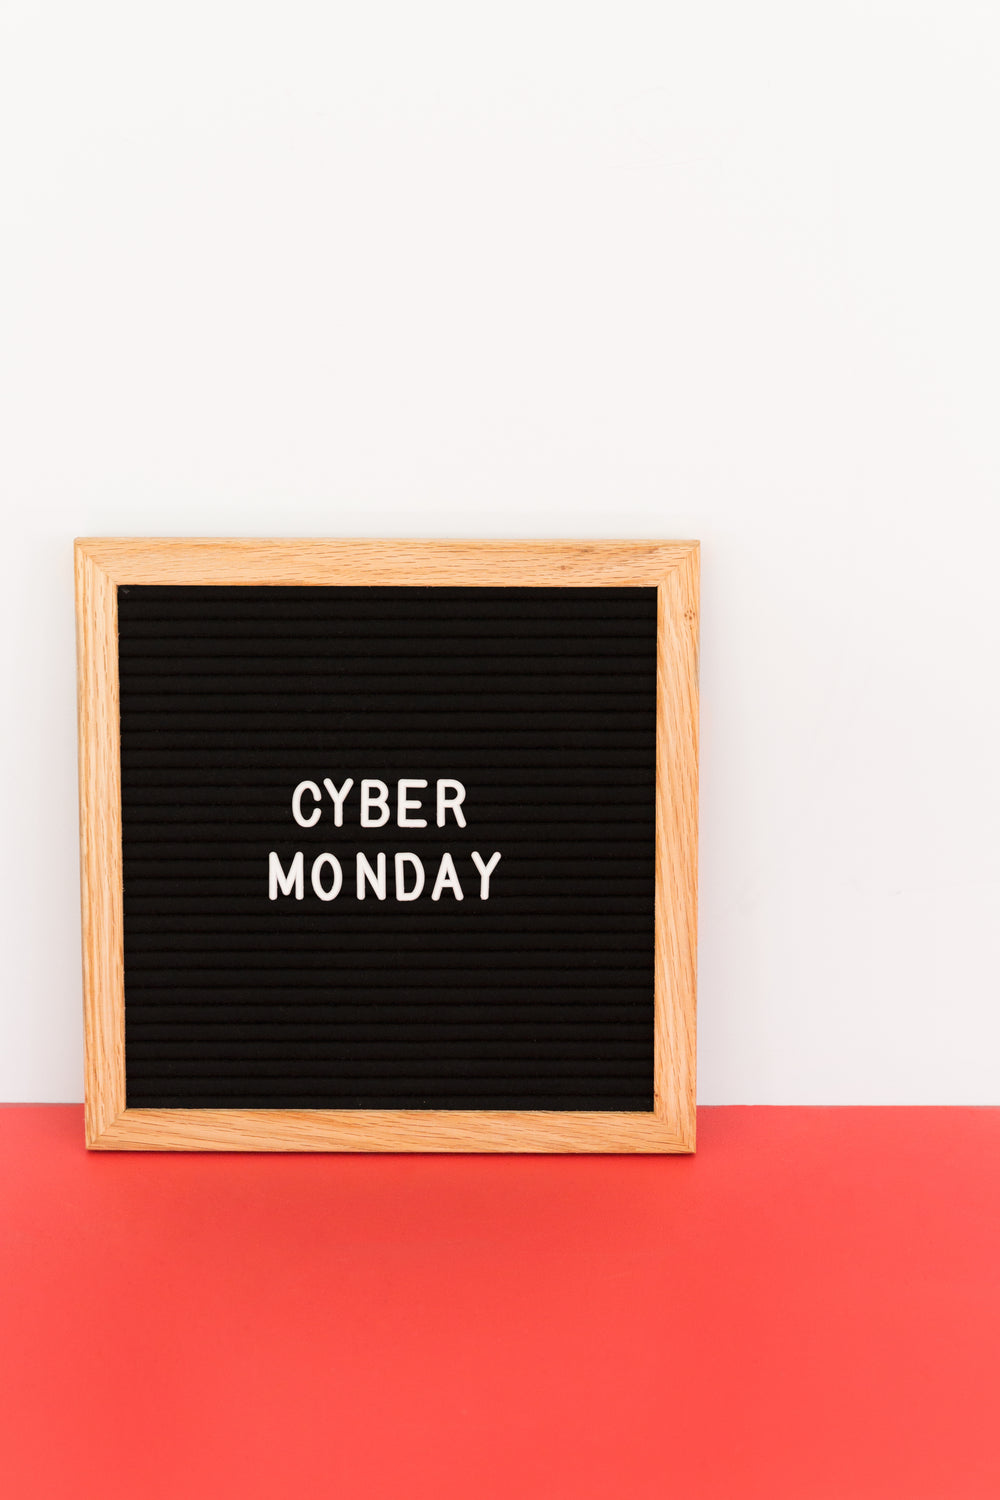 cyber monday sign on white and red